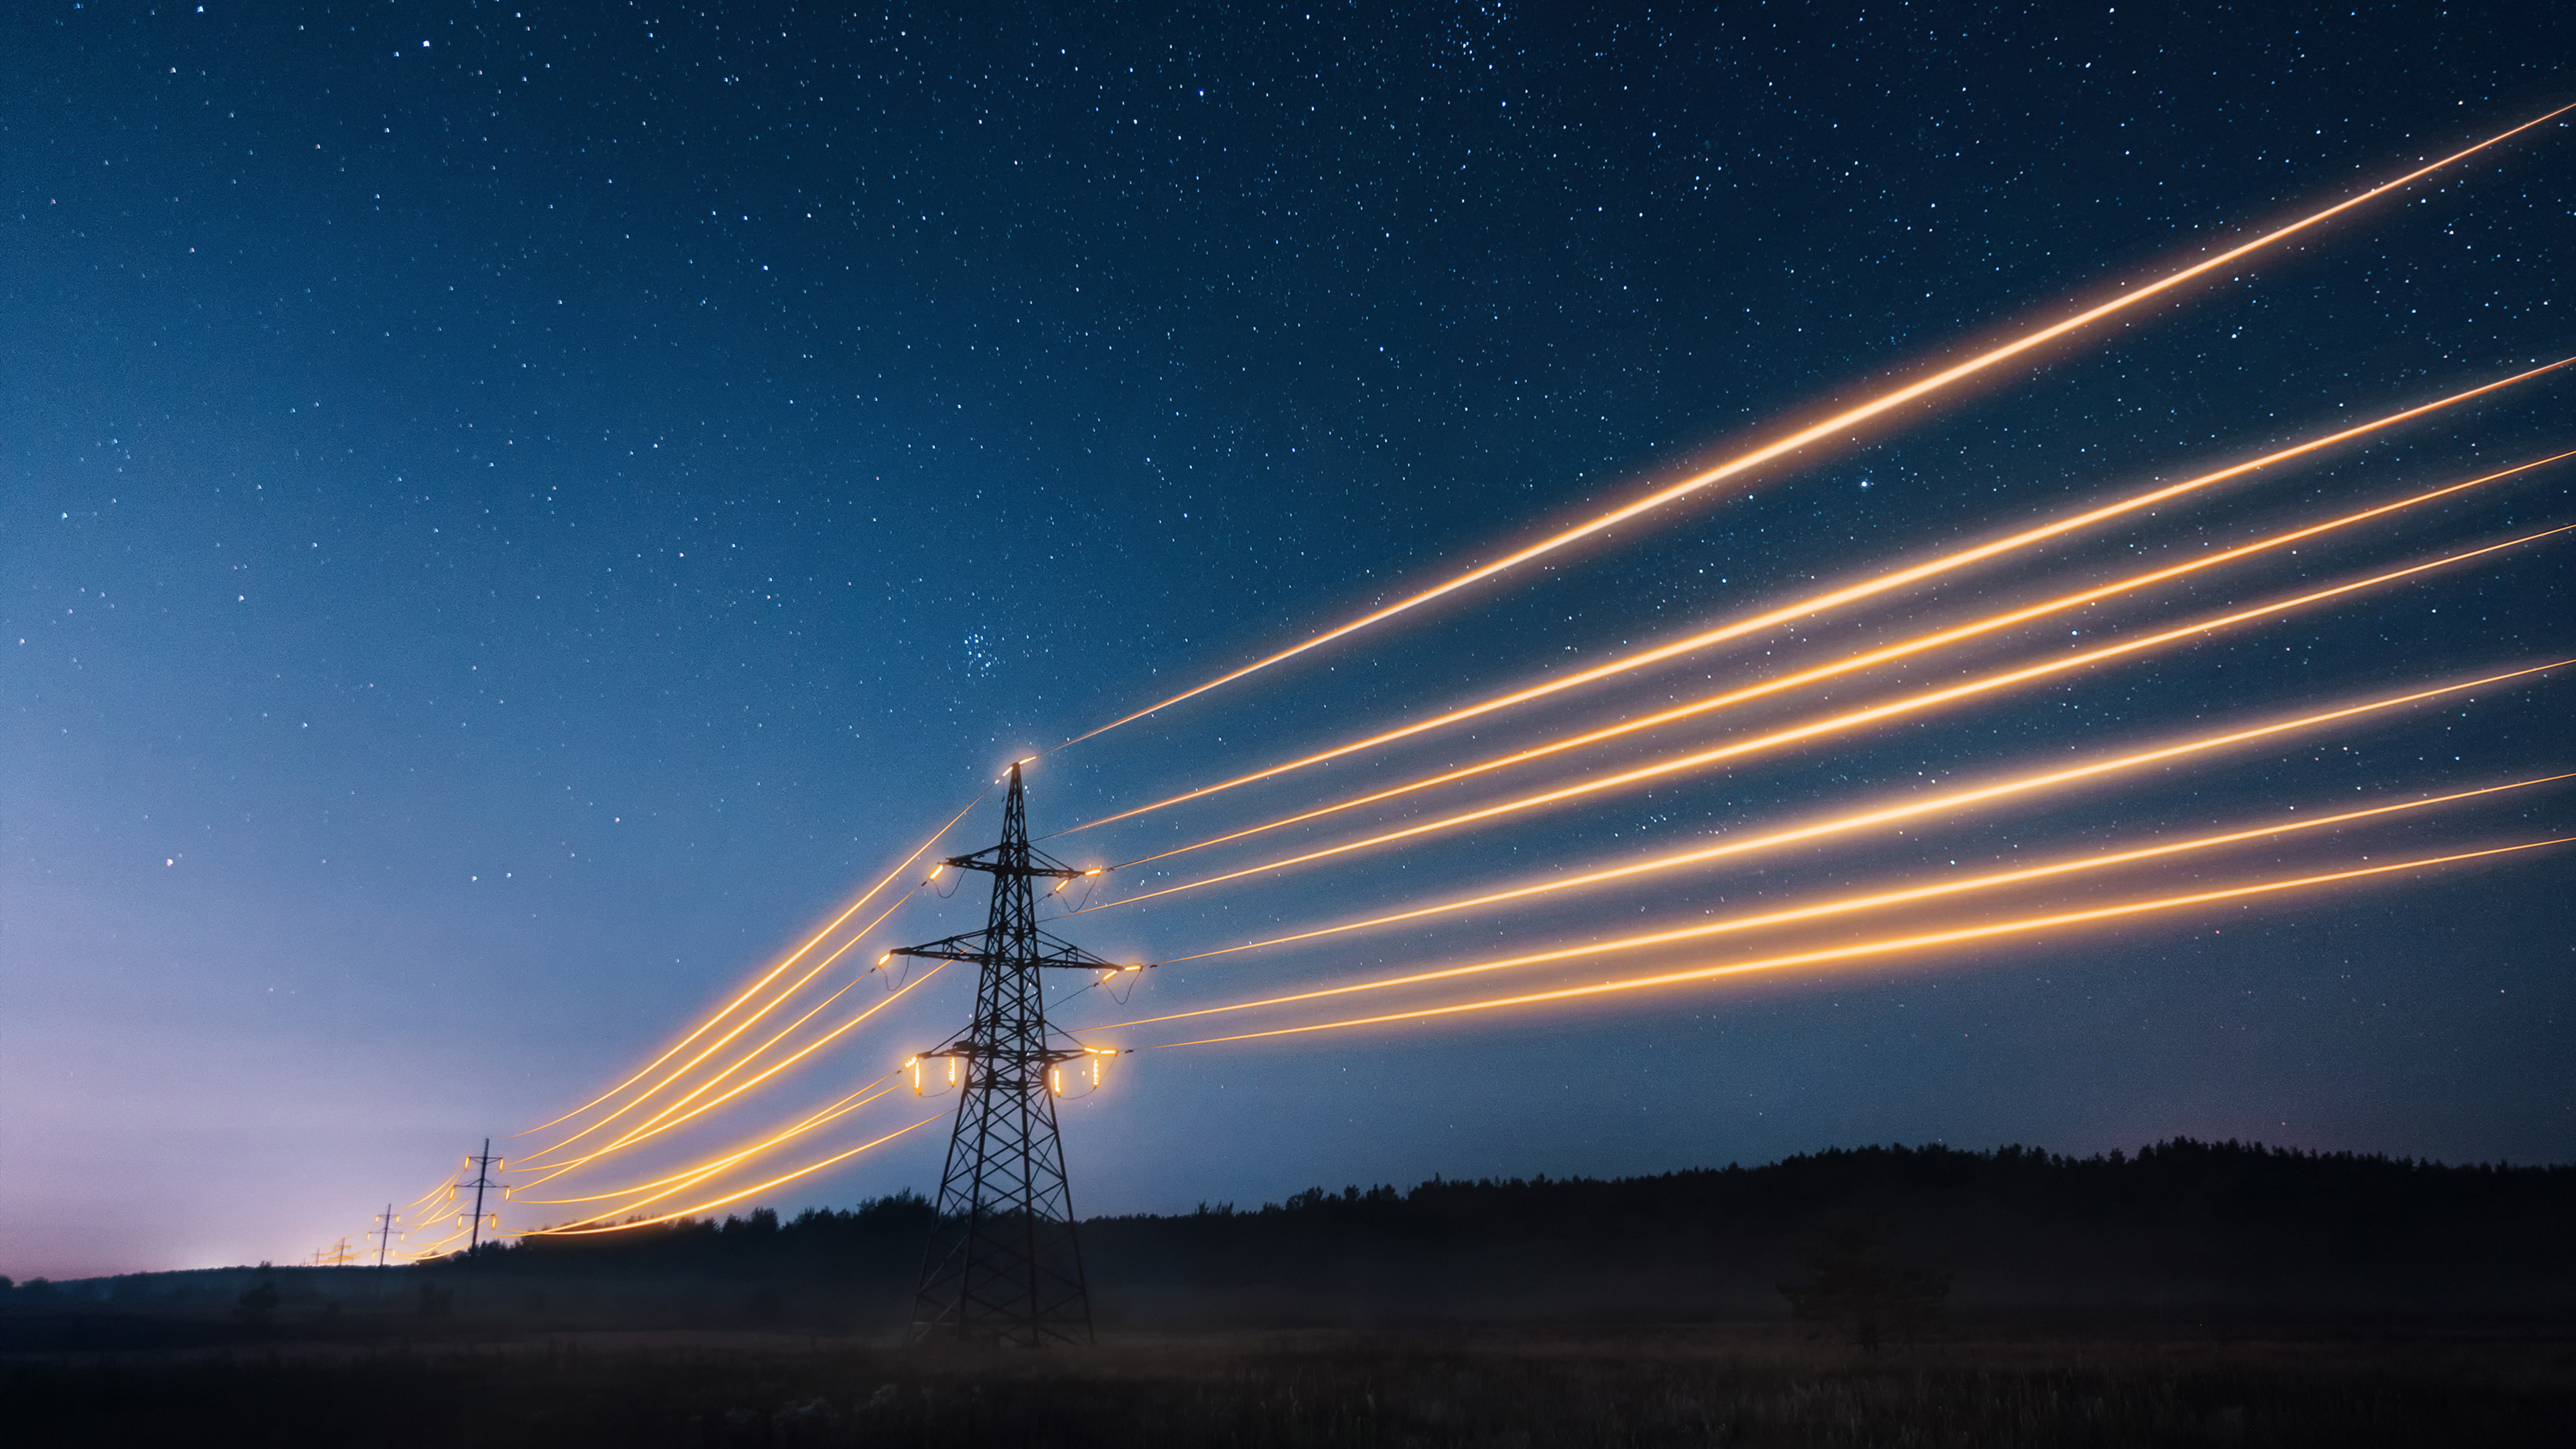 landscape image of glowing electrical wires against a starry night sky